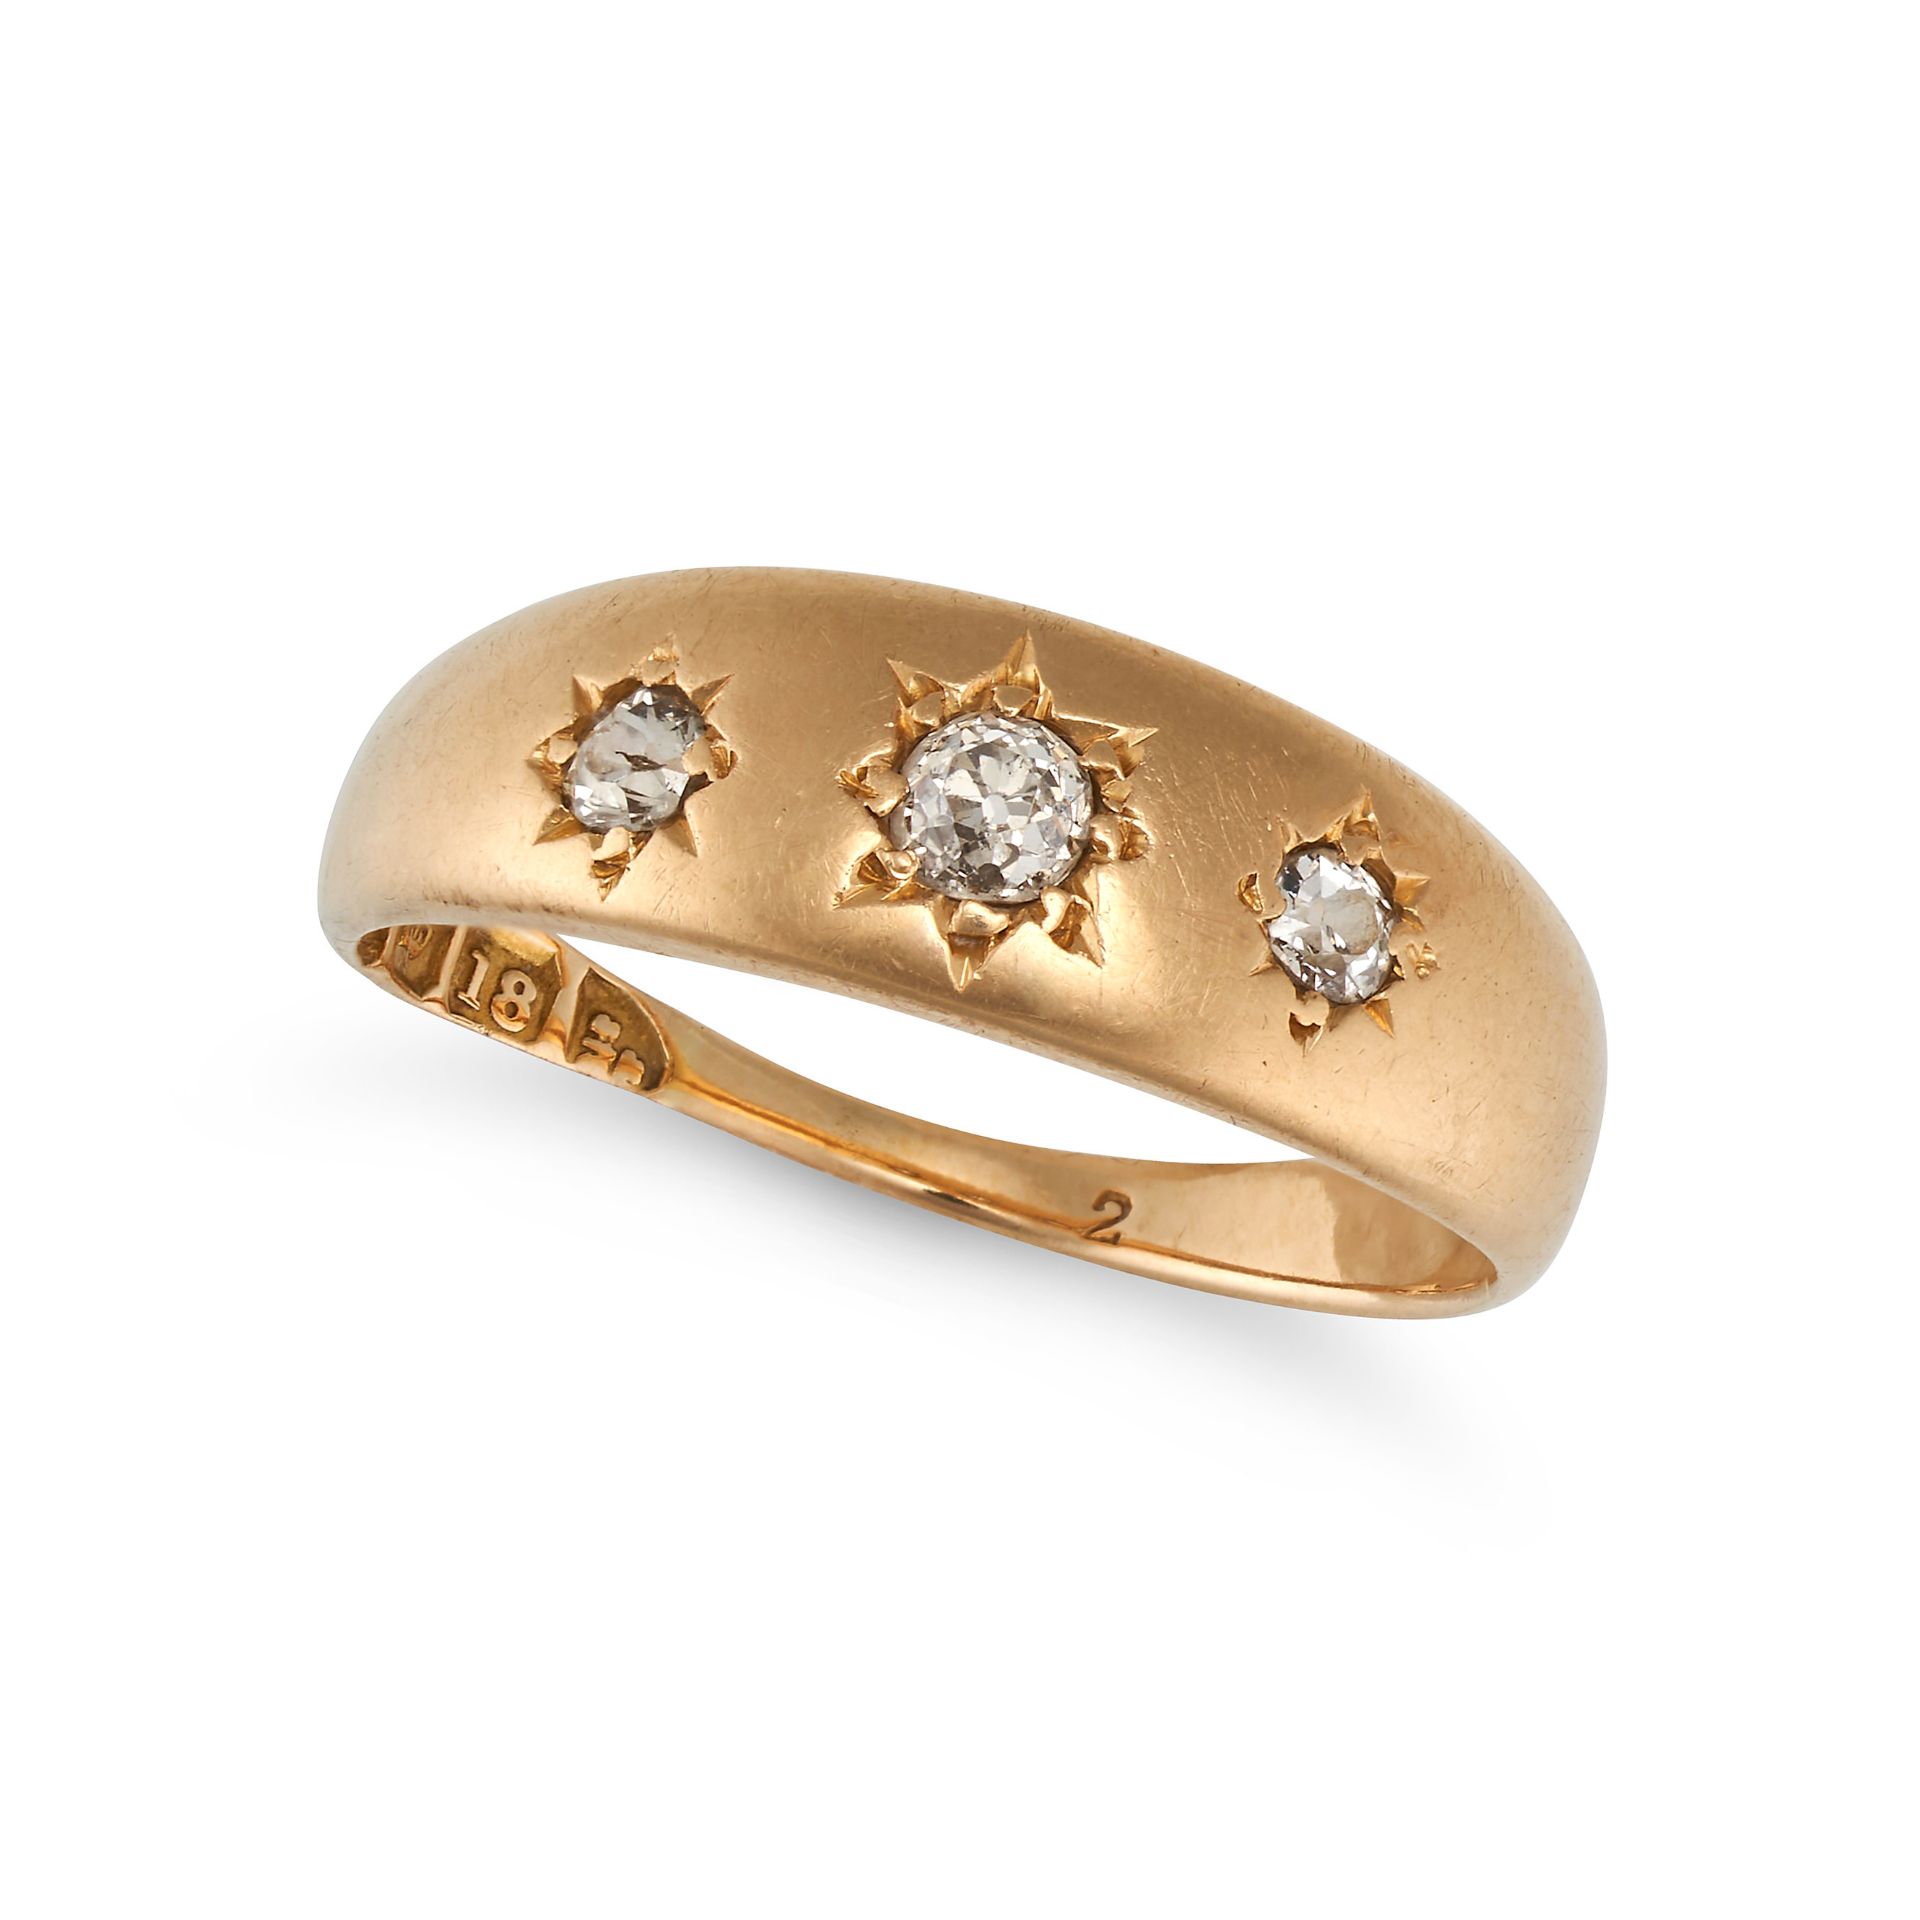 NO RESERVE - AN ANTIQUE VICTORIAN DIAMOND GYPSY RING in 18ct yellow gold, set with an old cut dia...